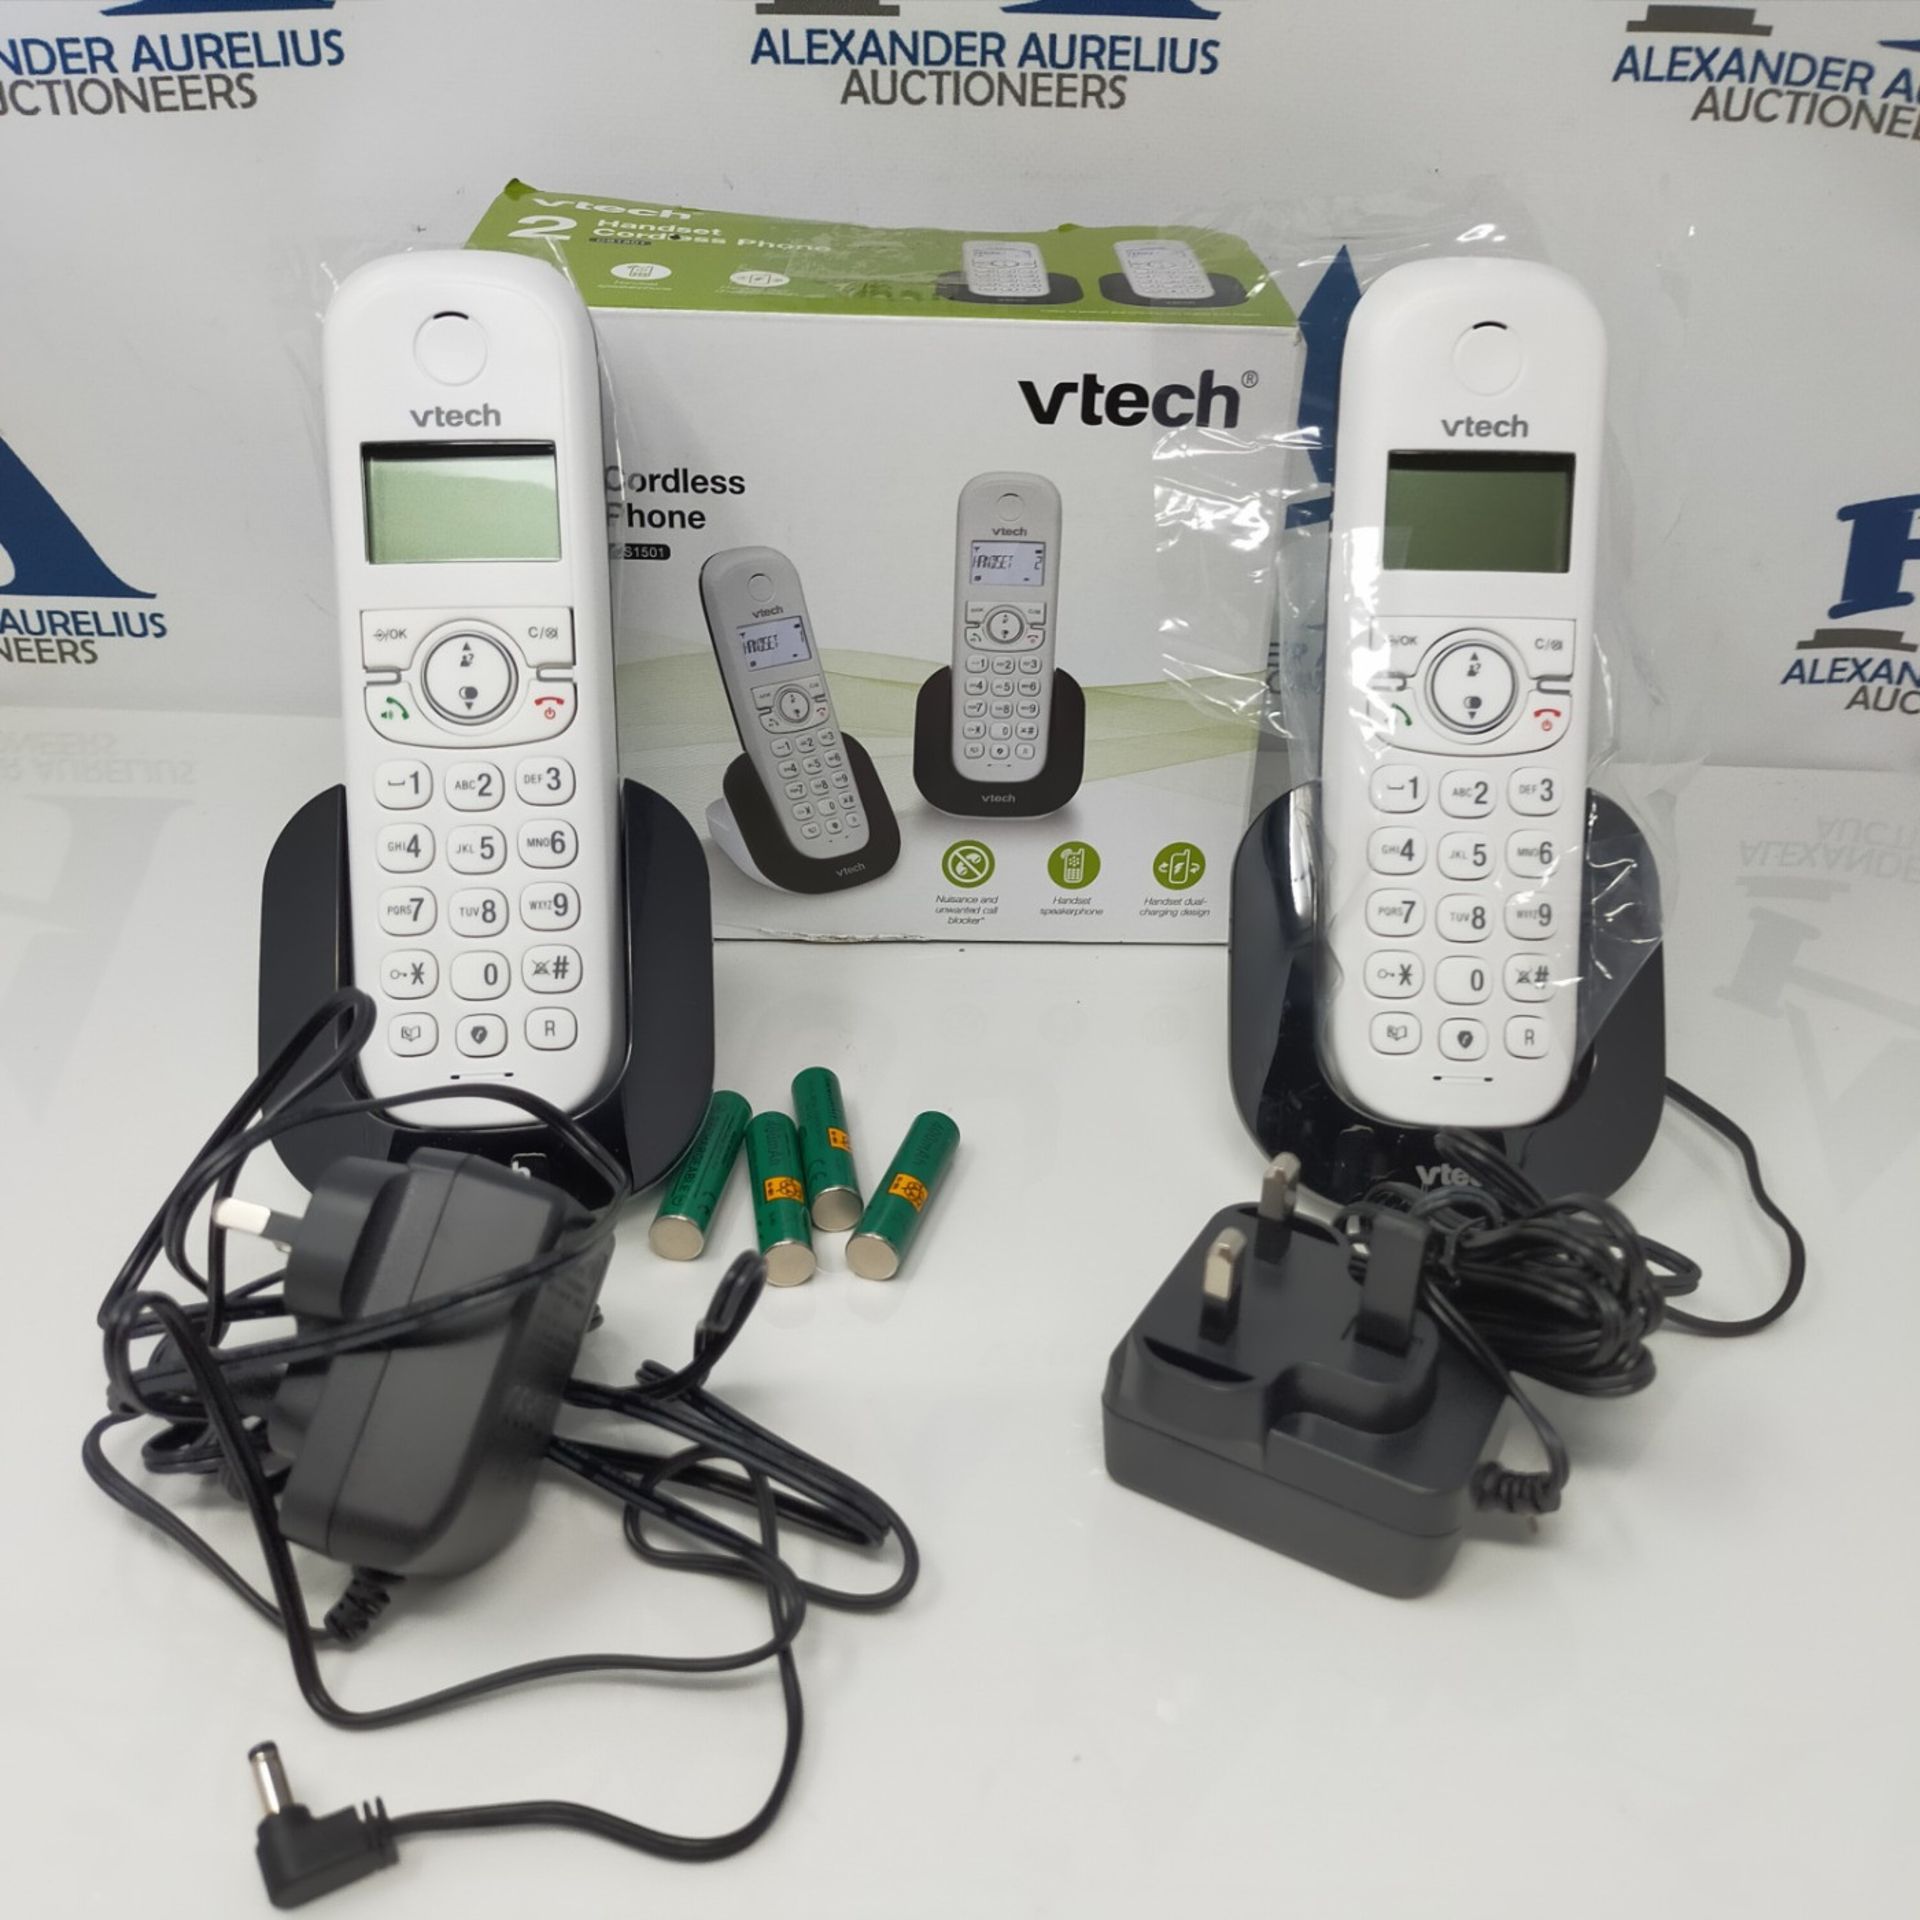 VTech CS1501 2-Handset Dual-Charging DECT Cordless Phone with Call Block, Caller ID/Ca - Image 3 of 3